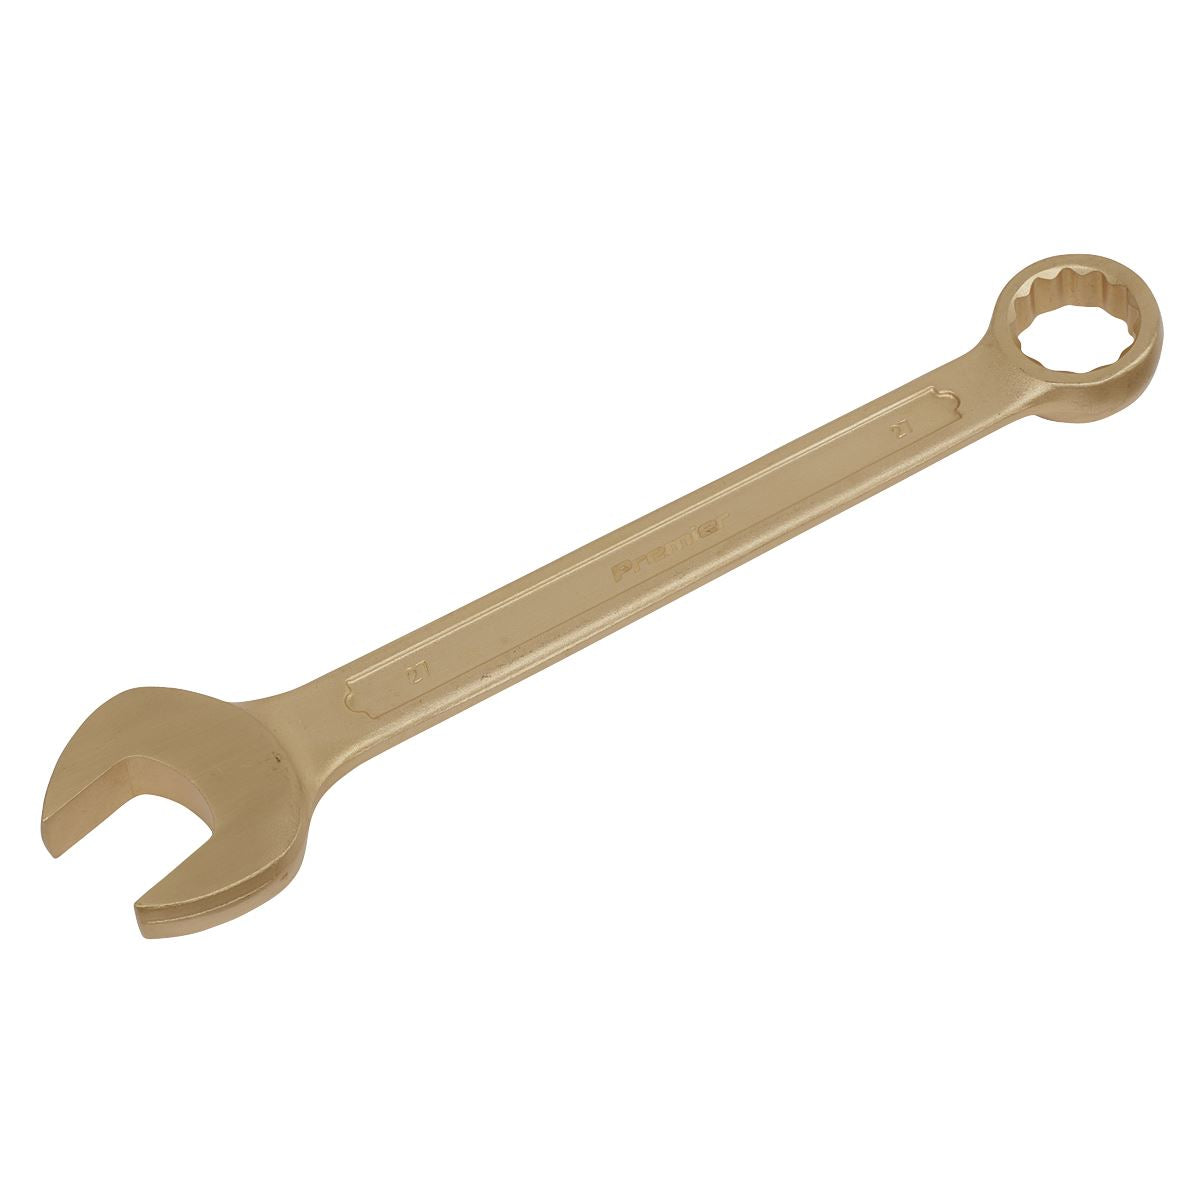 Sealey Premier Combination Spanner 27mm - Non-Sparking